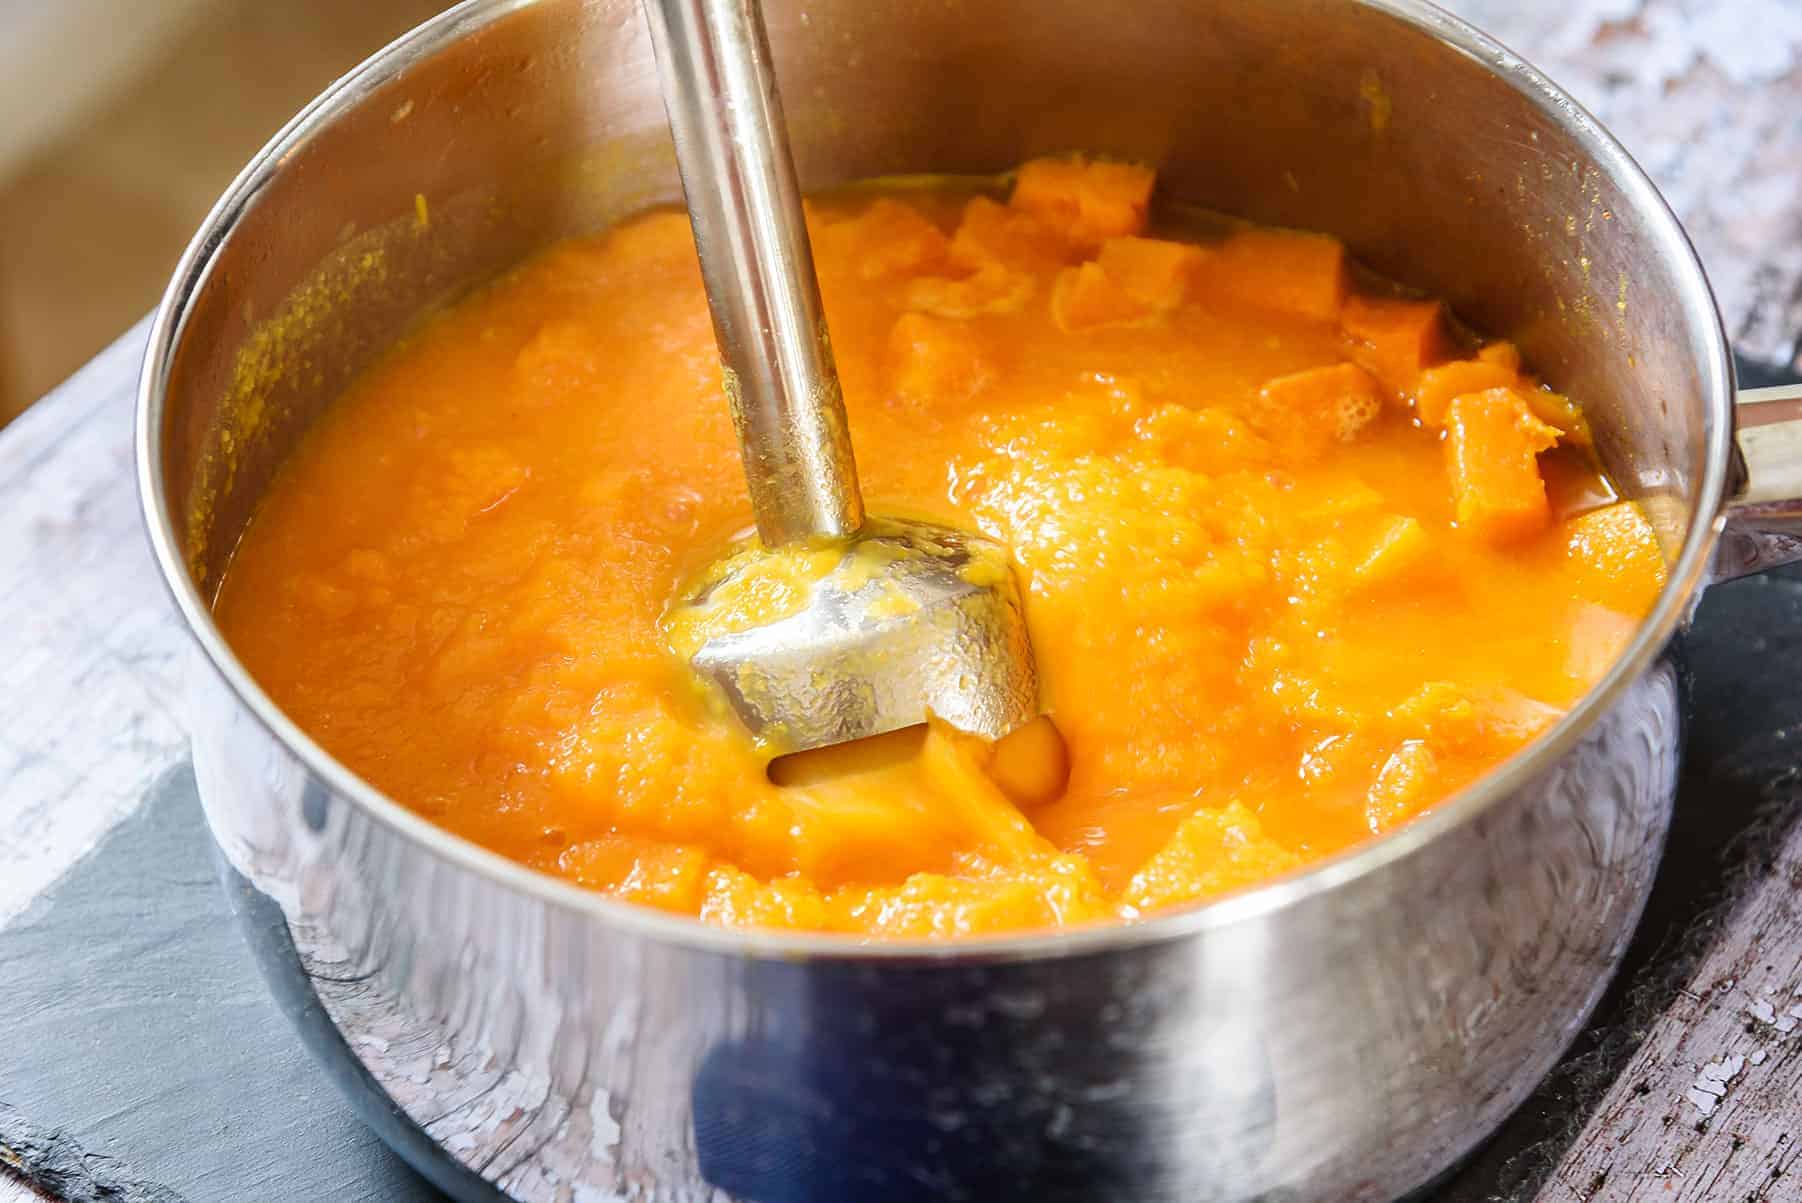 Blending the cooked butternut squash